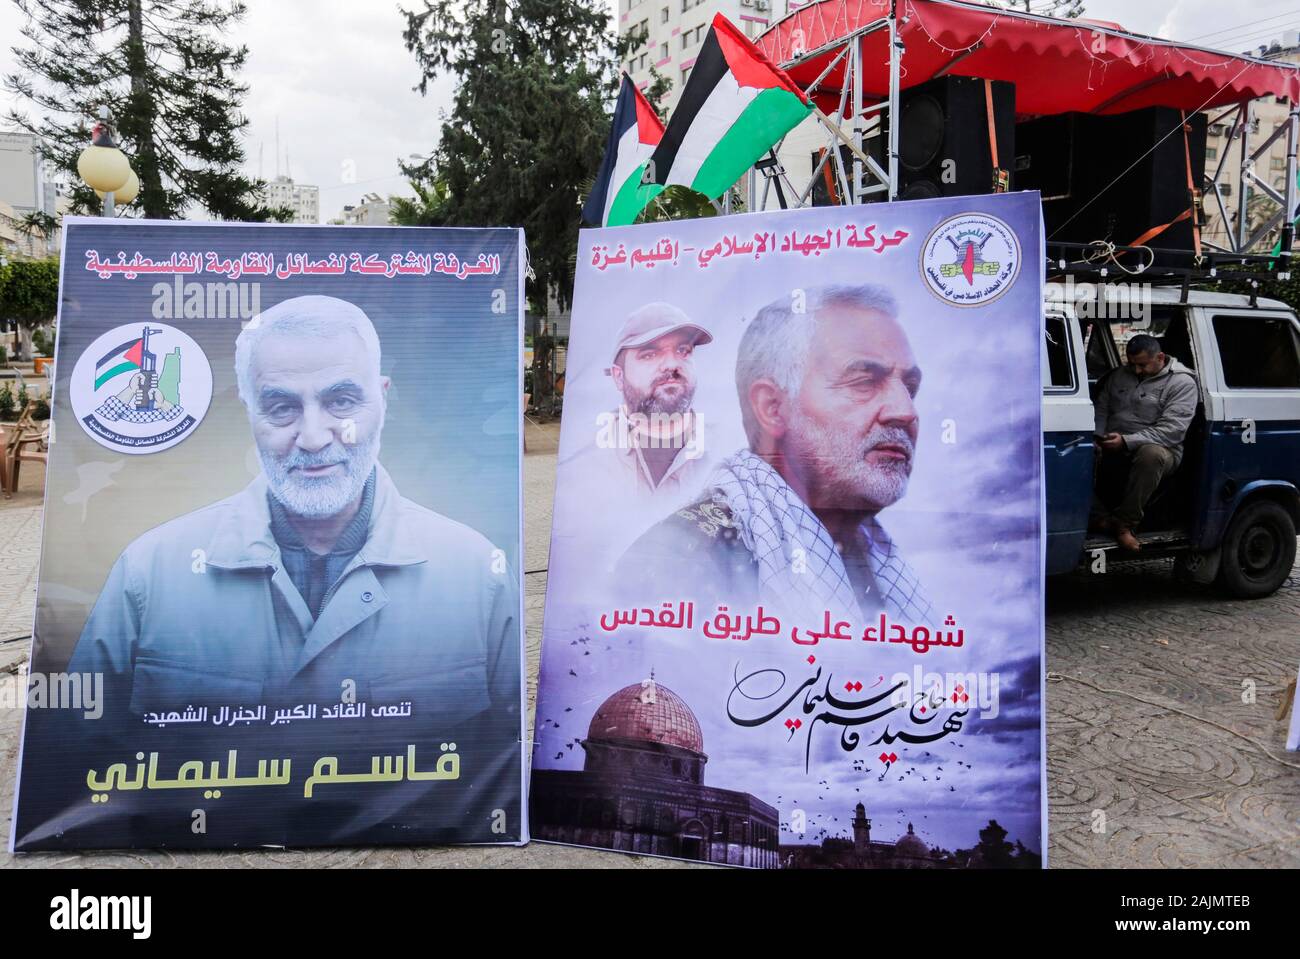 Placards with pictures of Qassem Soleimani, the Iran's head of the Quds Force who was killed during the US air strike are seen during the event in Gaza City. Stock Photo